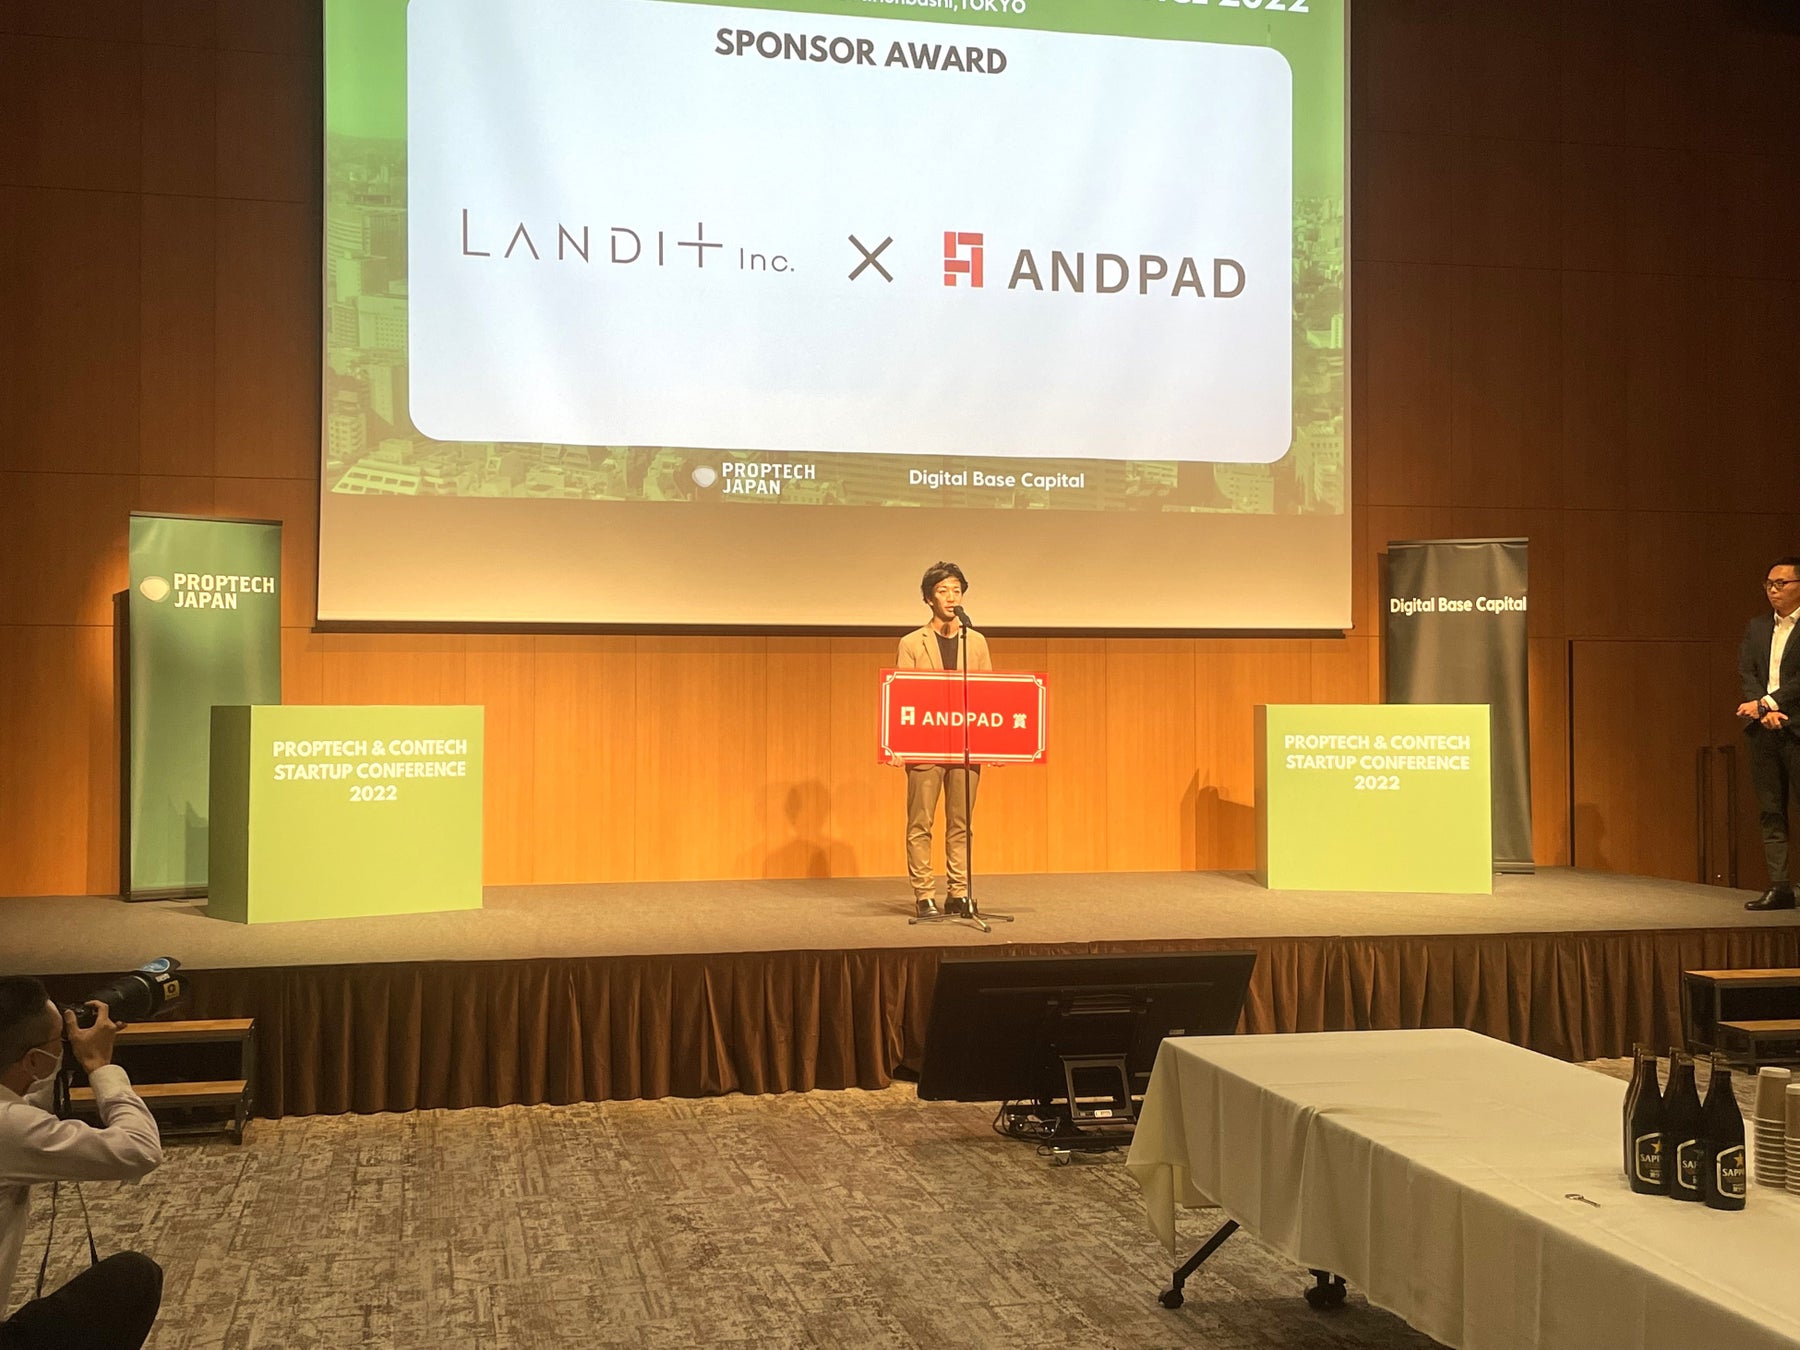 Landit、不動産＆建設DXイベント『PropTech & ConTech Startup Conference 2022』にて「Best of PCSC 2022」、「ANDPAD賞」を受賞のサブ画像5